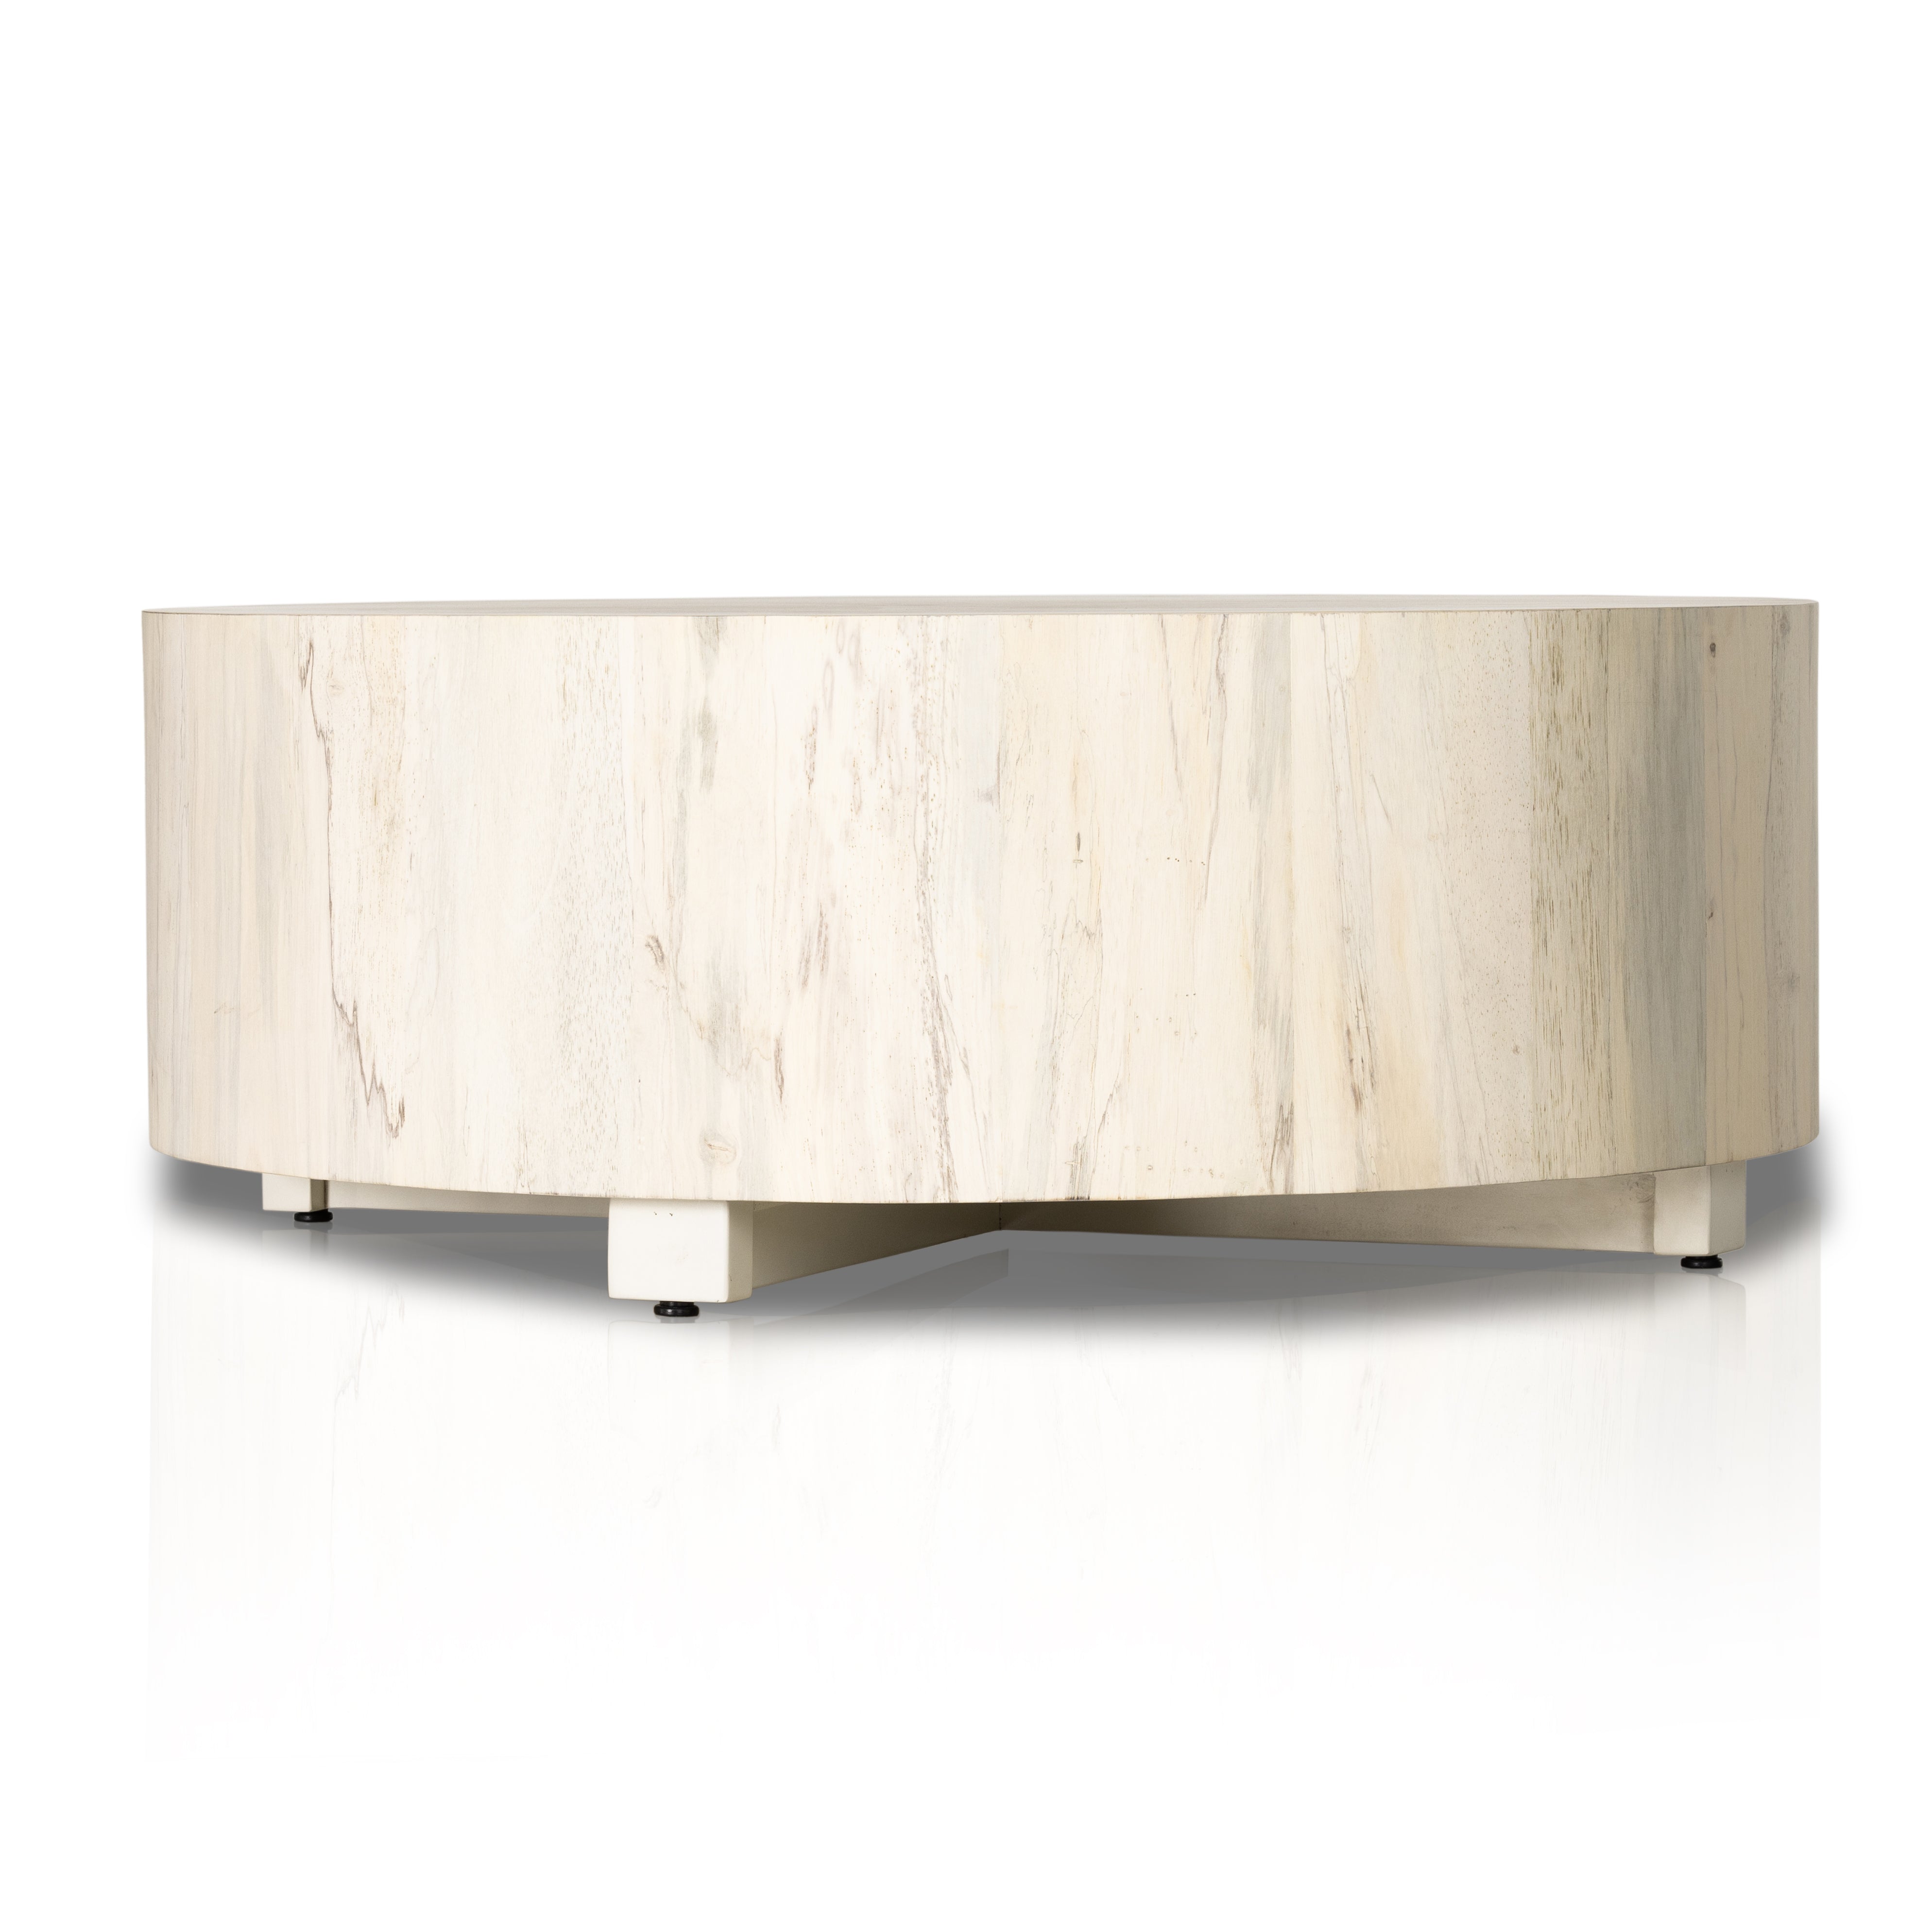 Stunning forces of nature are captured in a coffee table, as spalted primavera wood is hand-shaped into a cylindrical silhouette and finished in a white hue. Reflective of woods' natural character, a slight color variance is possible. Amethyst Home provides interior design, new construction, custom furniture, and area rugs in the Des Moines metro area.